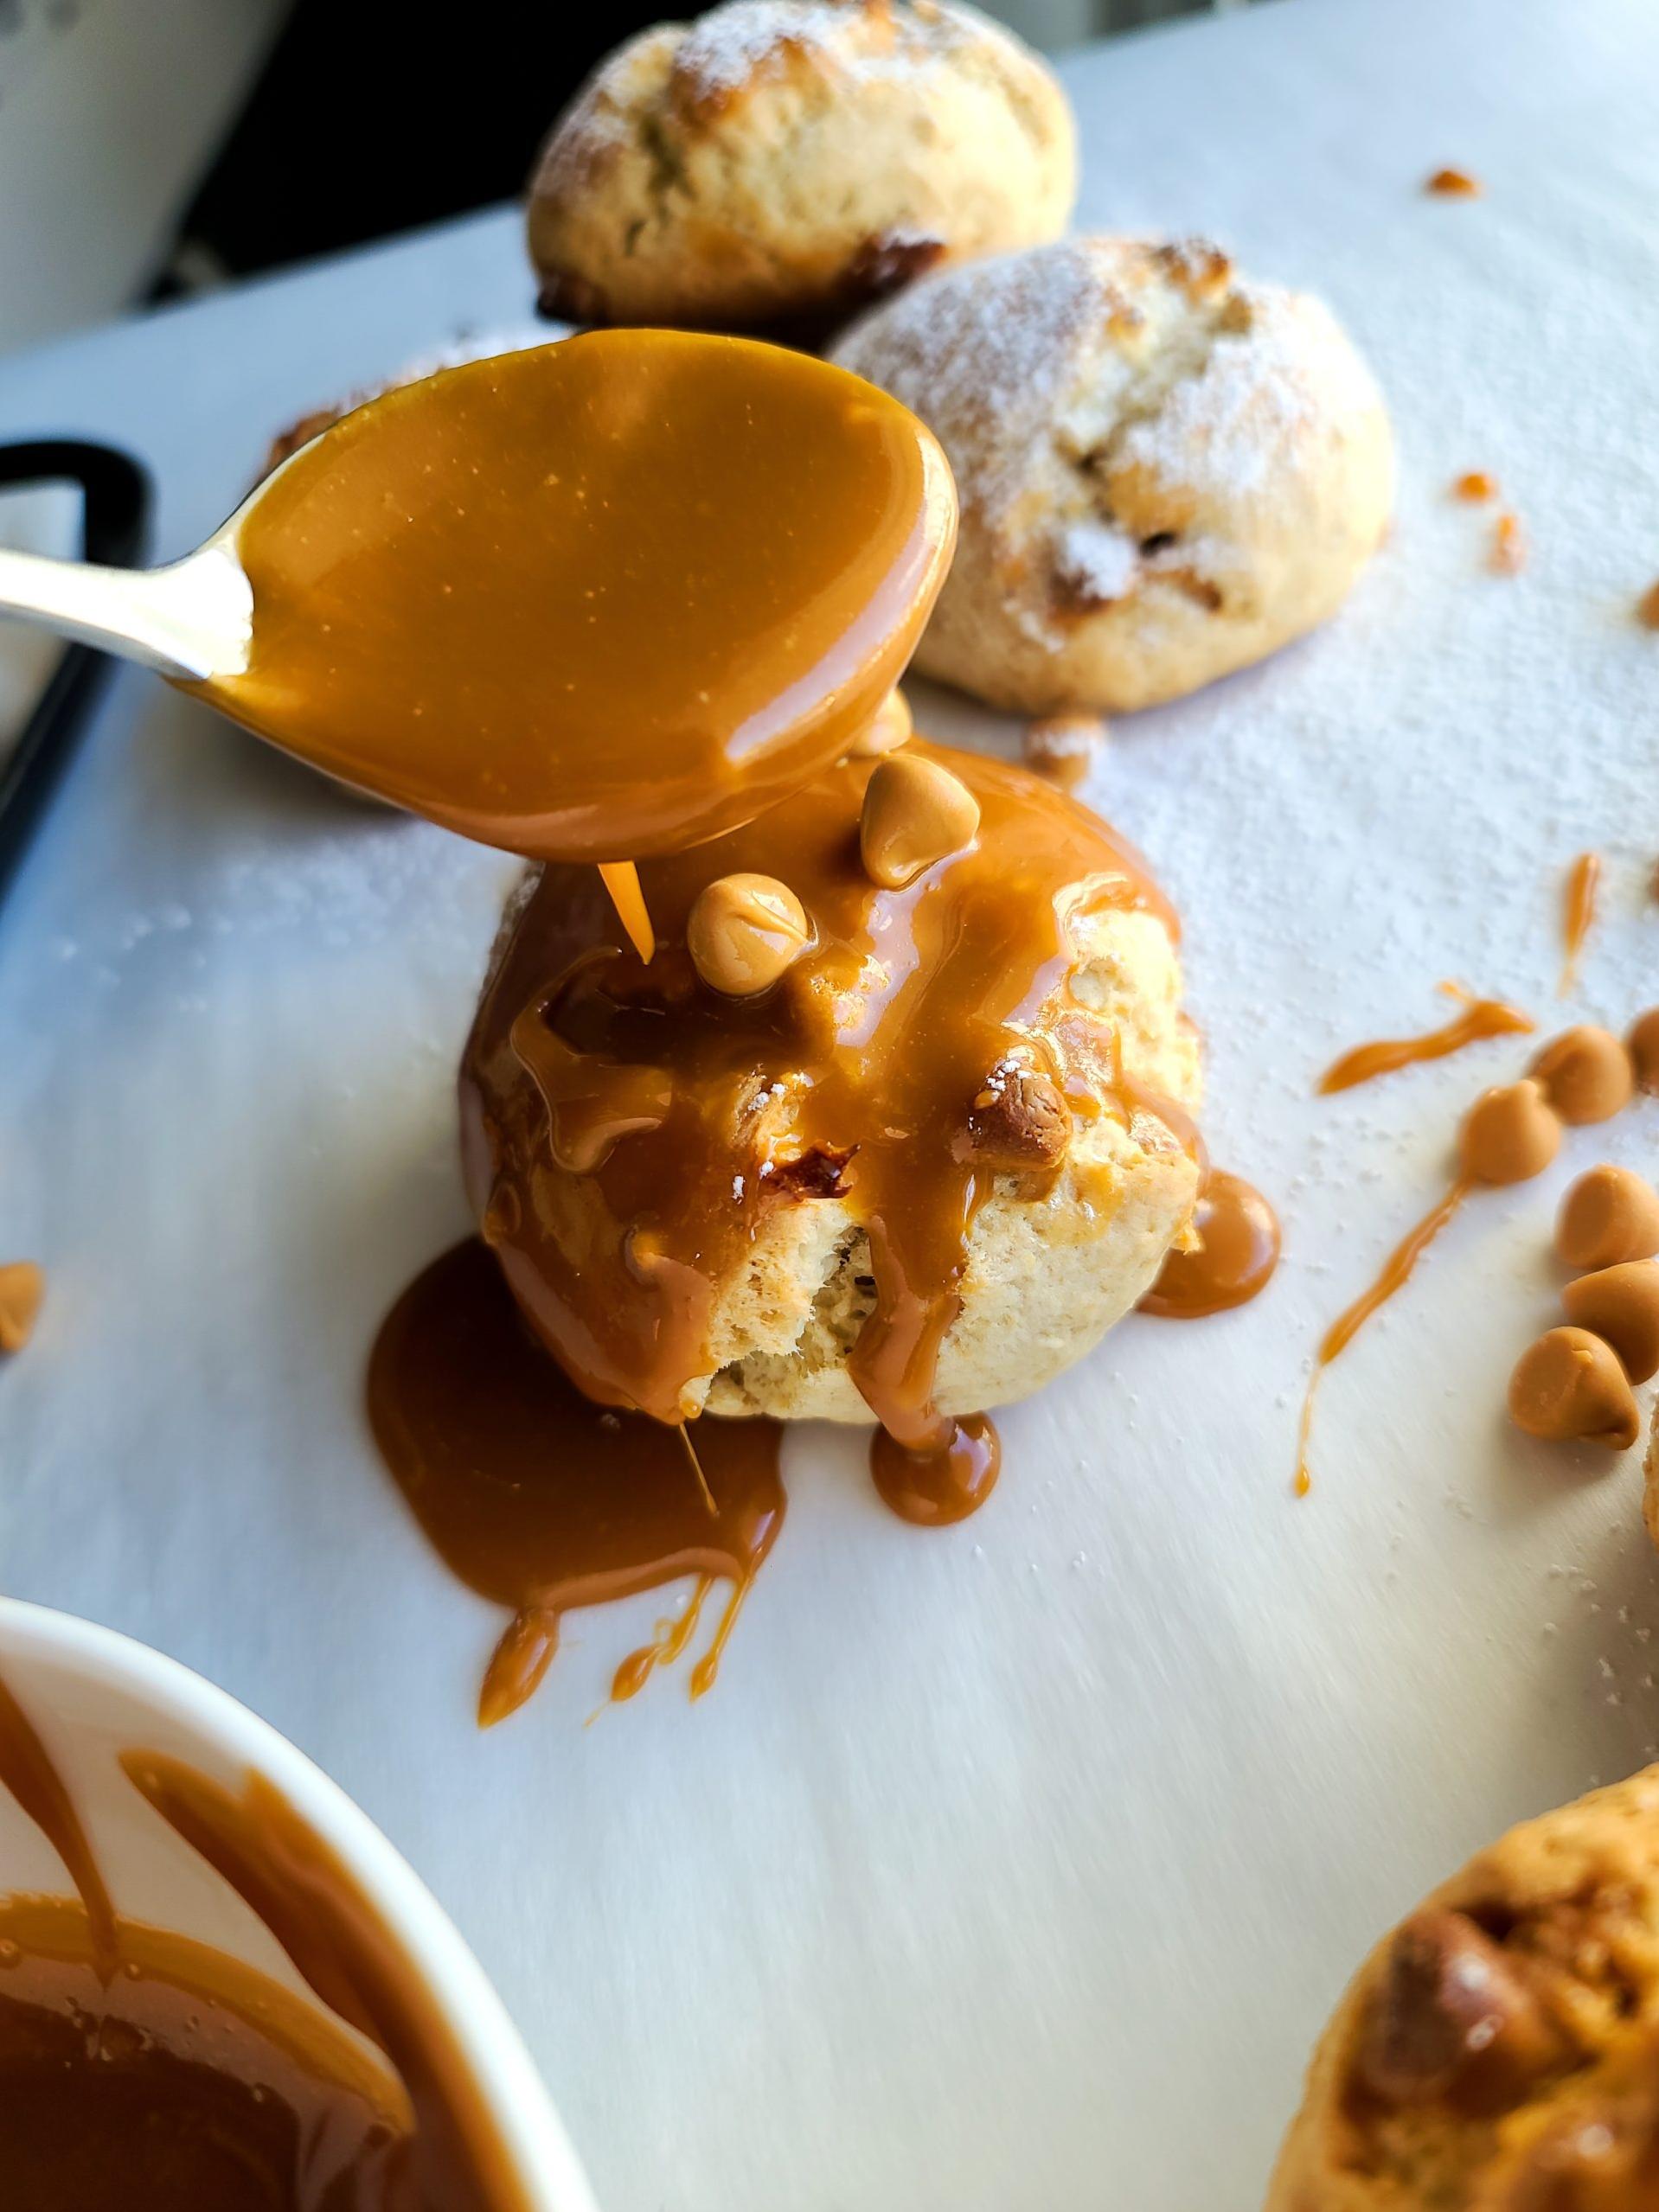  Make your morning routine a bit sweeter with these Starbucks inspired caramel scones.